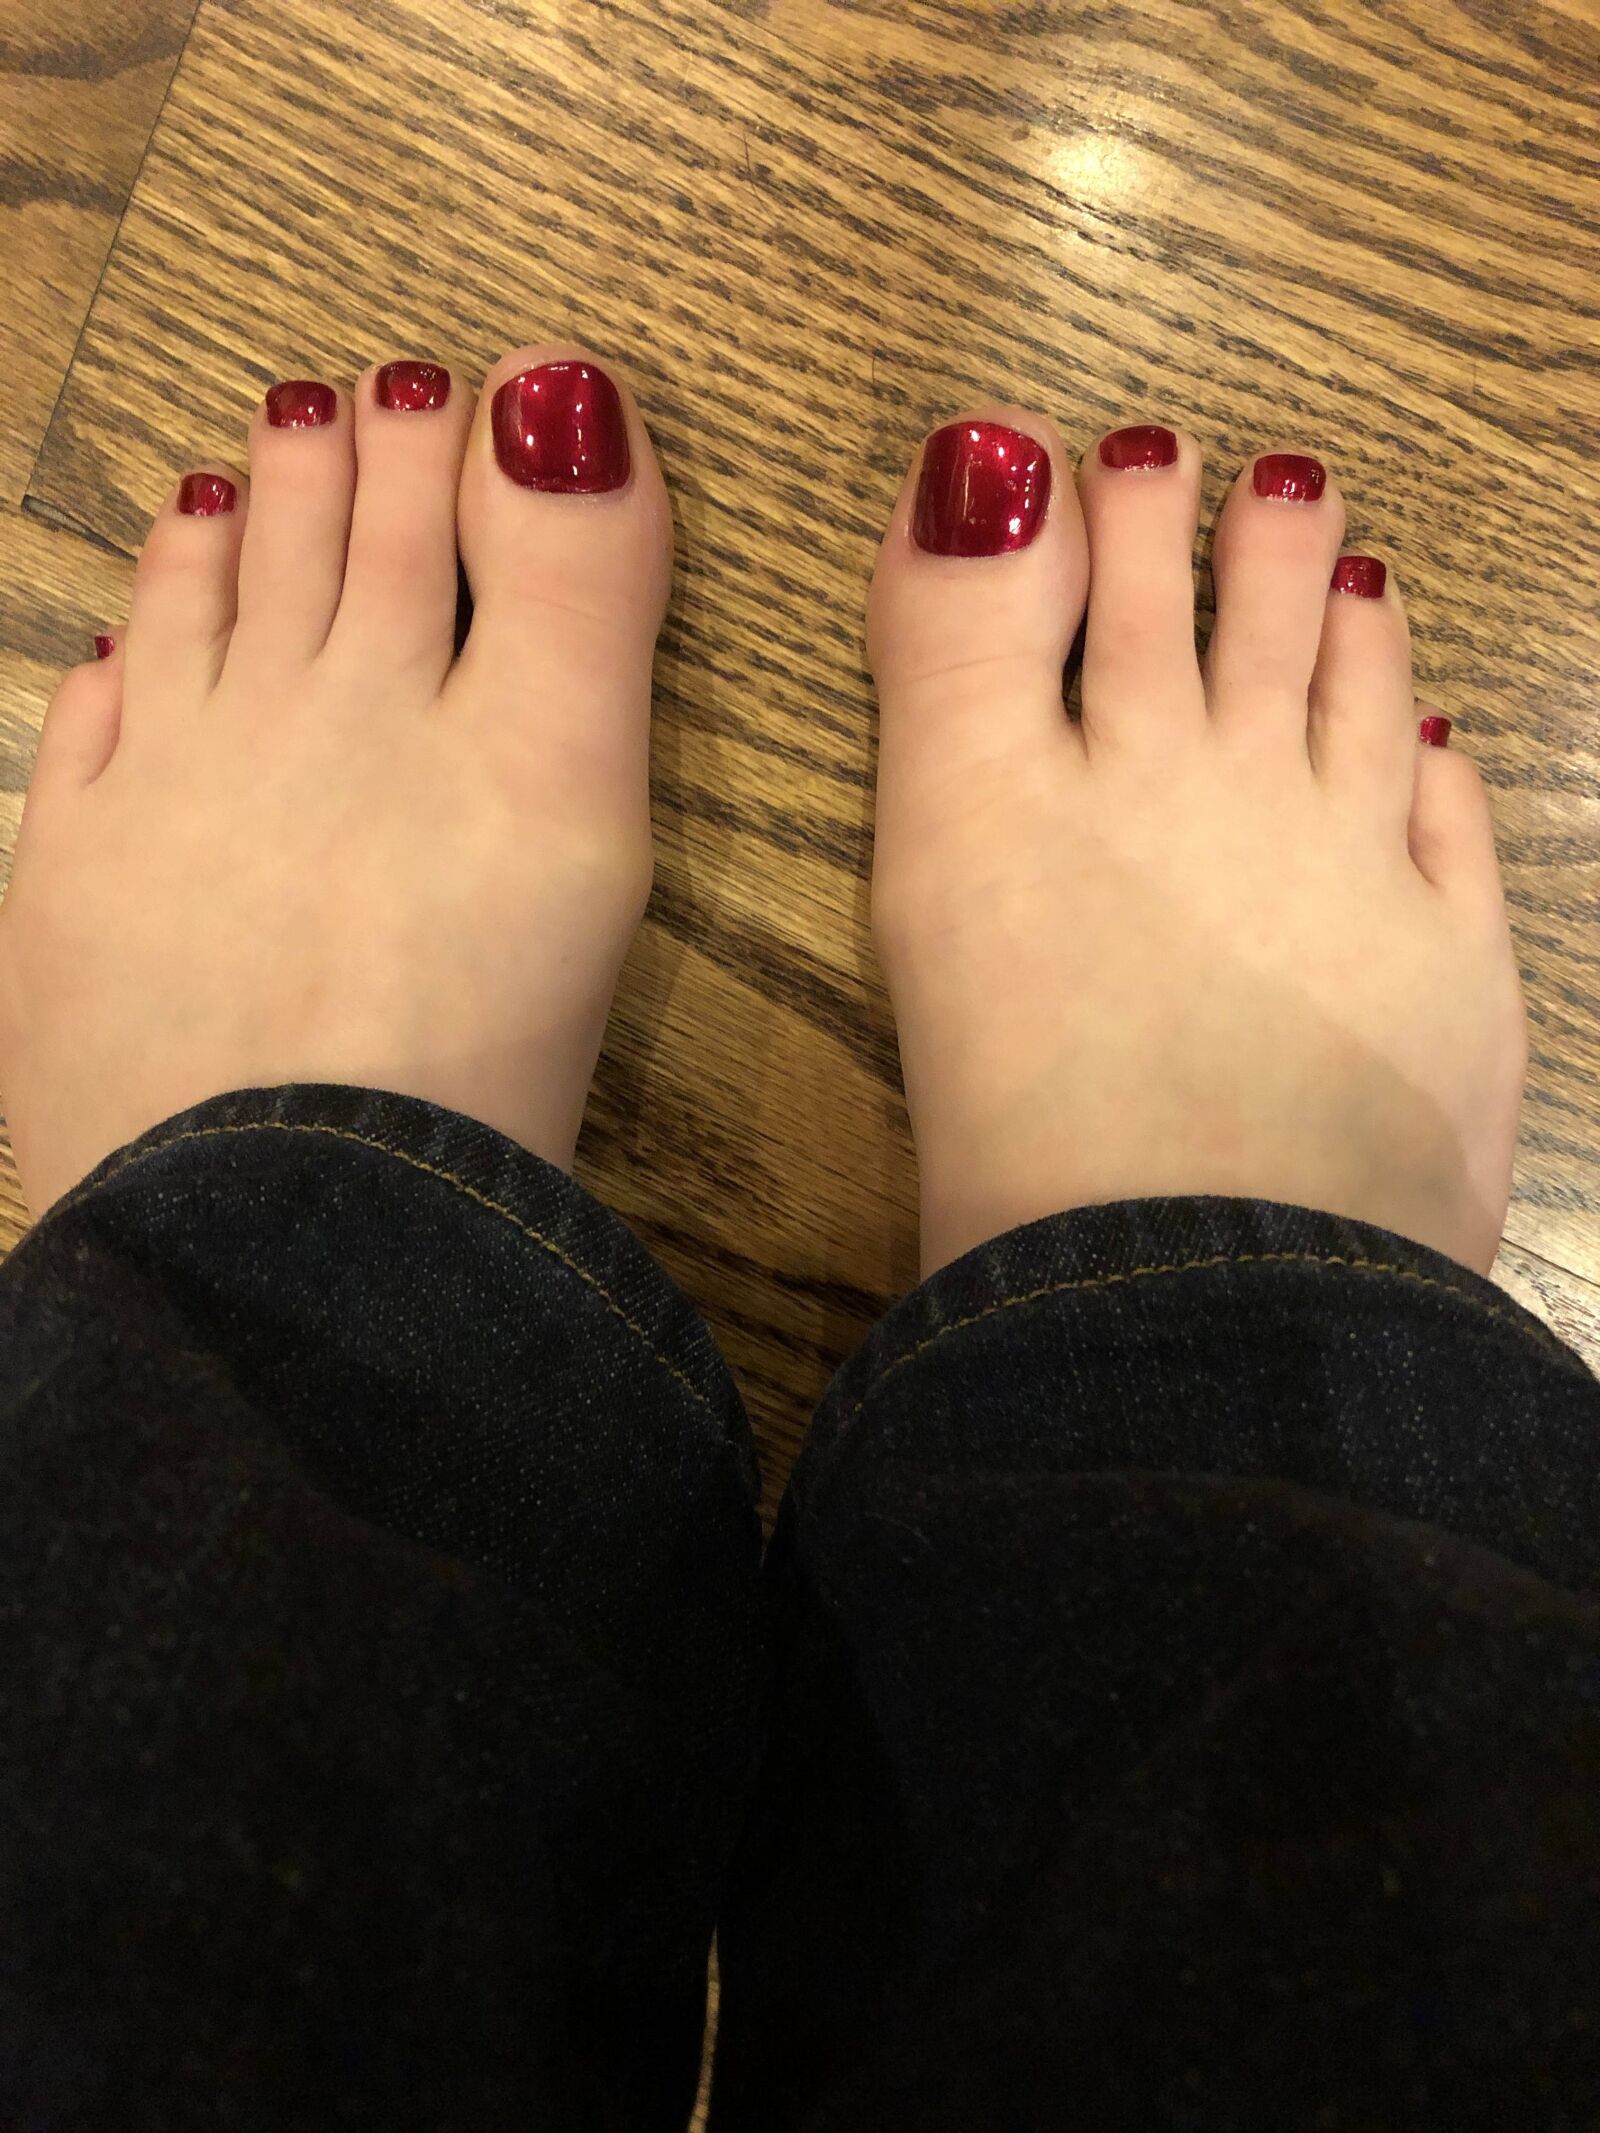 Apple iPhone X + iPhone X back dual camera 4mm f/1.8 sample photo. Feet, toes, pedicure photography